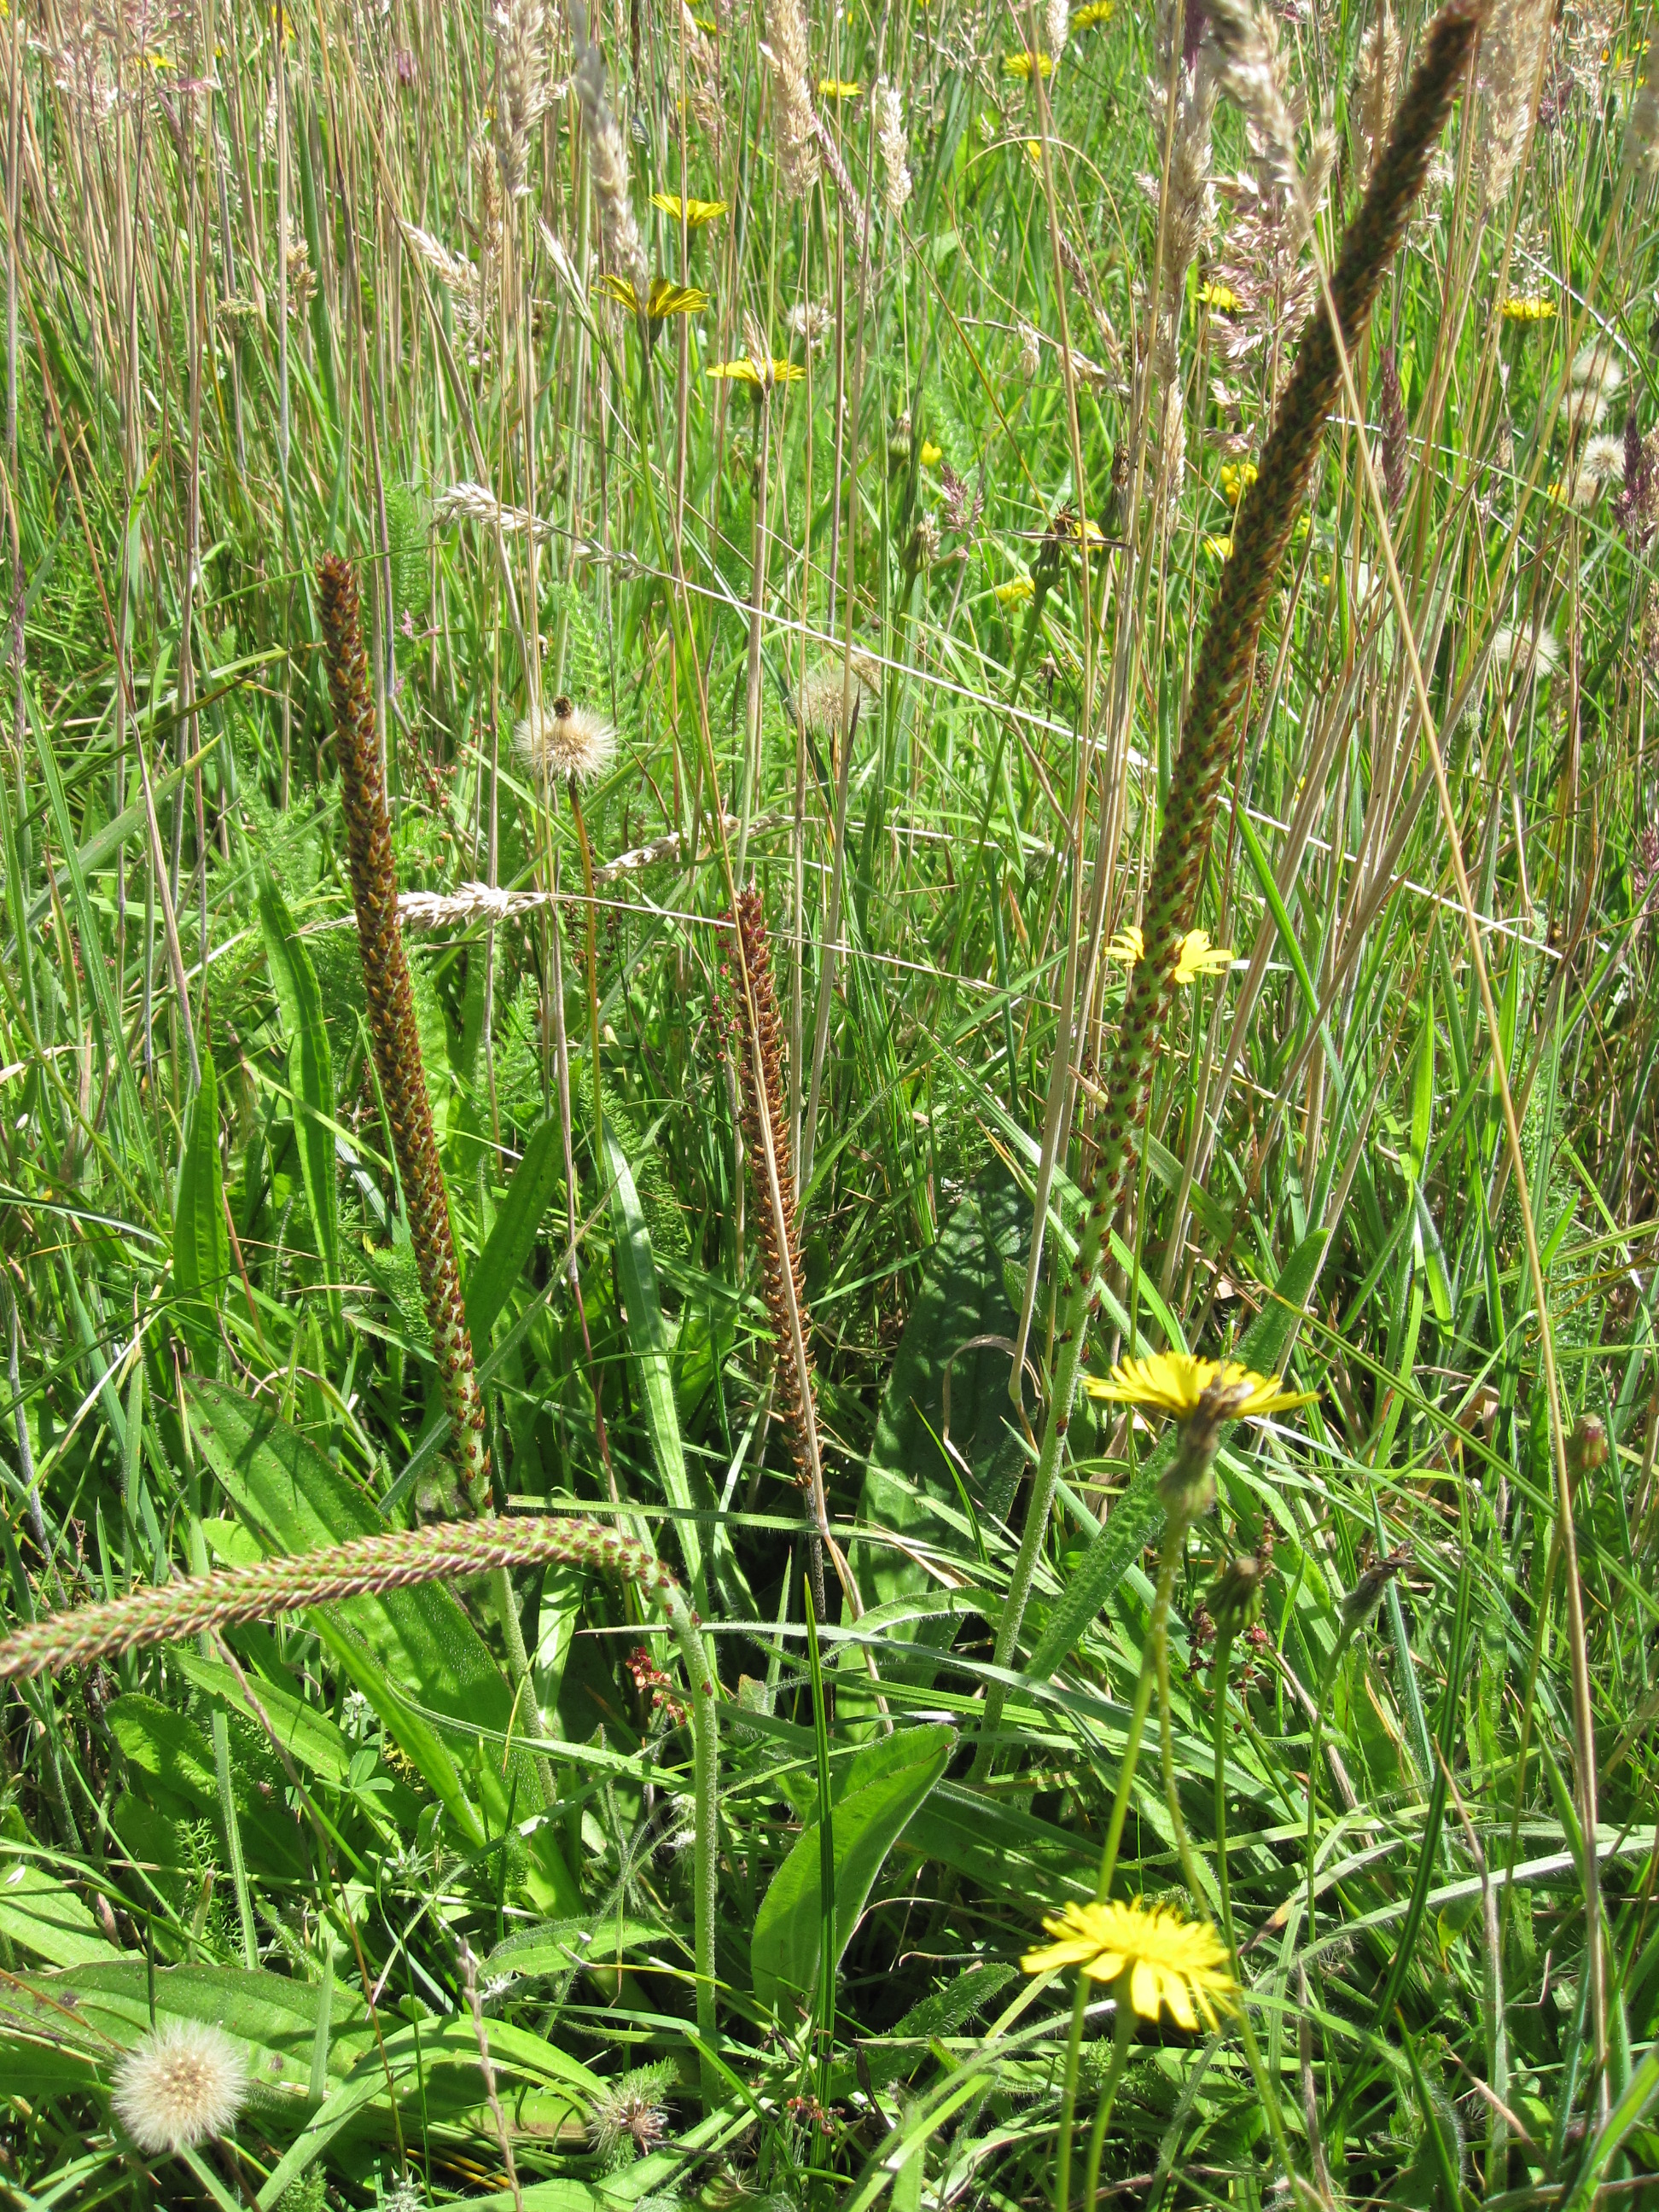 Tall Coastal Plantain with flowering spikes rising out of a grassy field